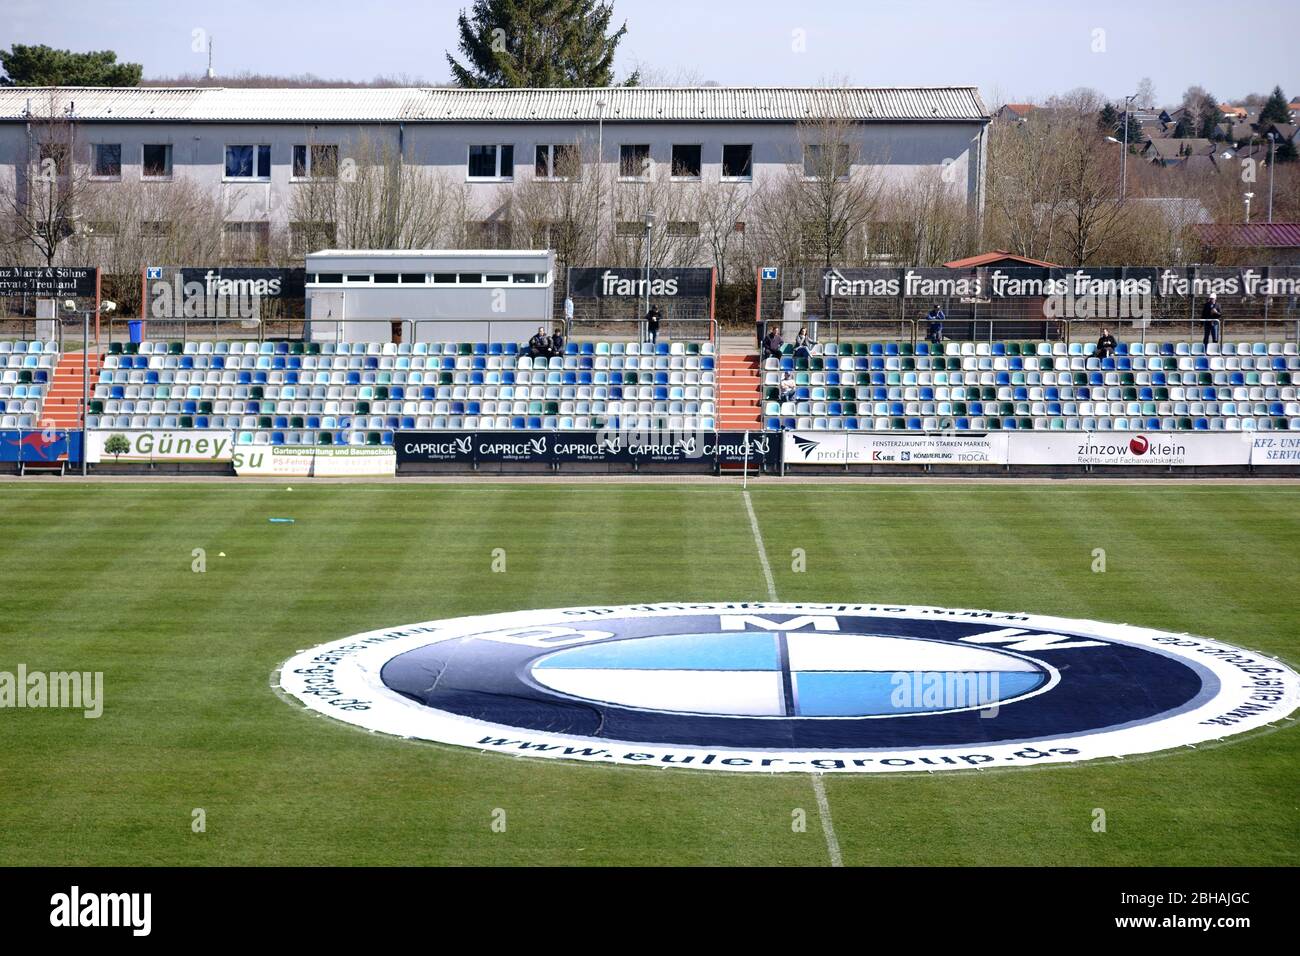 Pirmasens, Germany - March 30, 2019: The modern and colorful seats of a tribune of the sports park Husterhöhe the football team FK Pirmasens on March 30, 2019 in Pirmasens. Stock Photo